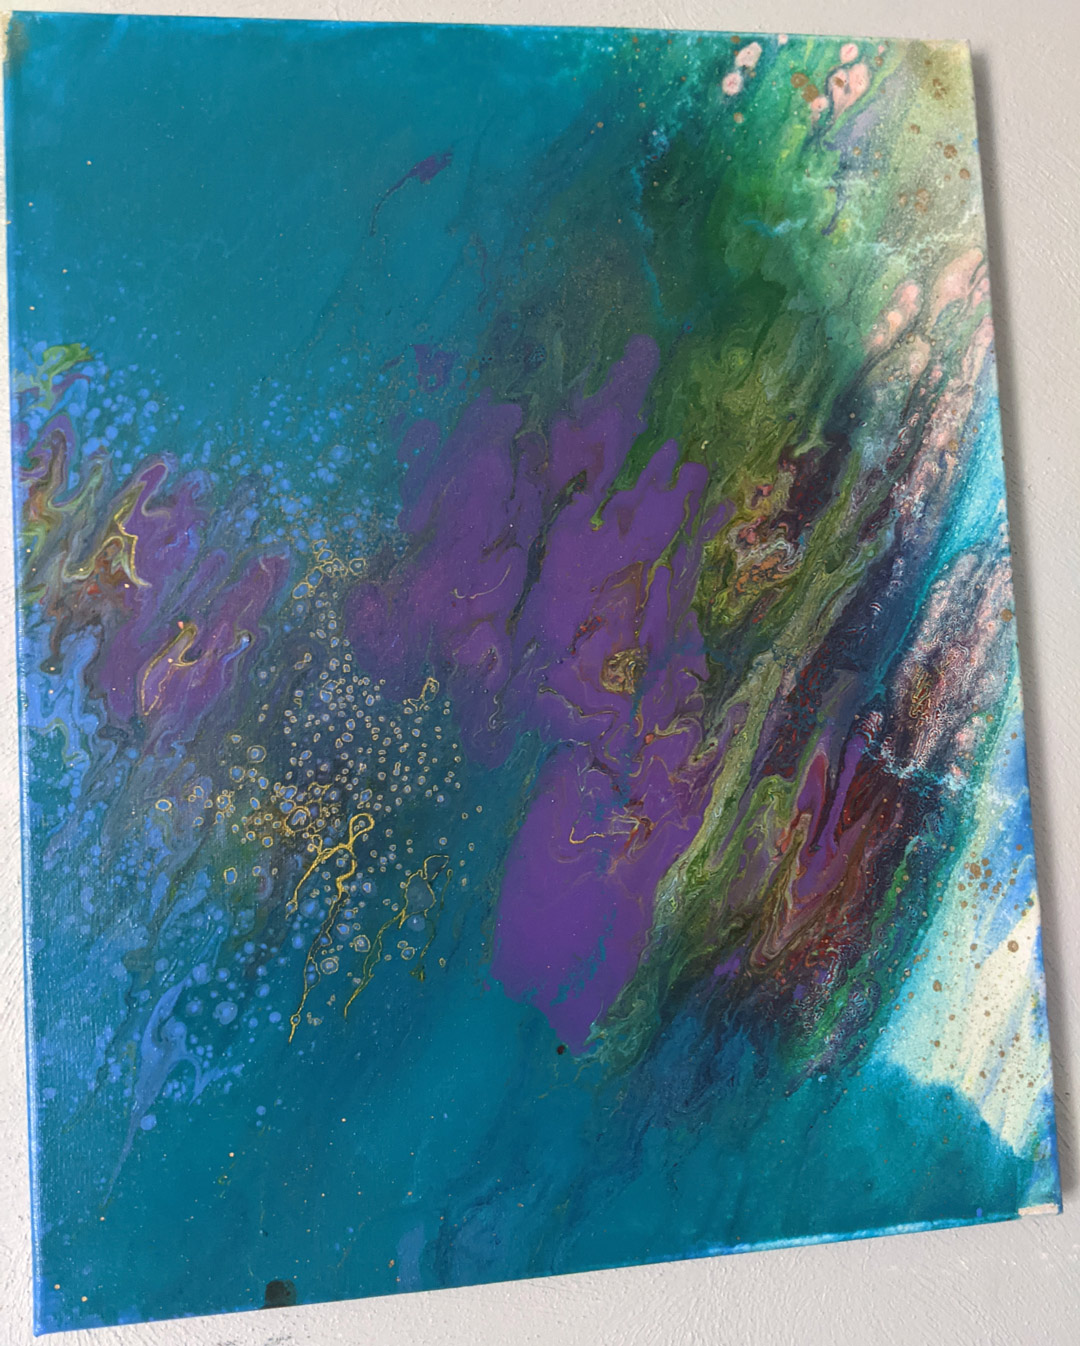 A tie-dye-like colorful painting of mostly teal with gold splatter. 